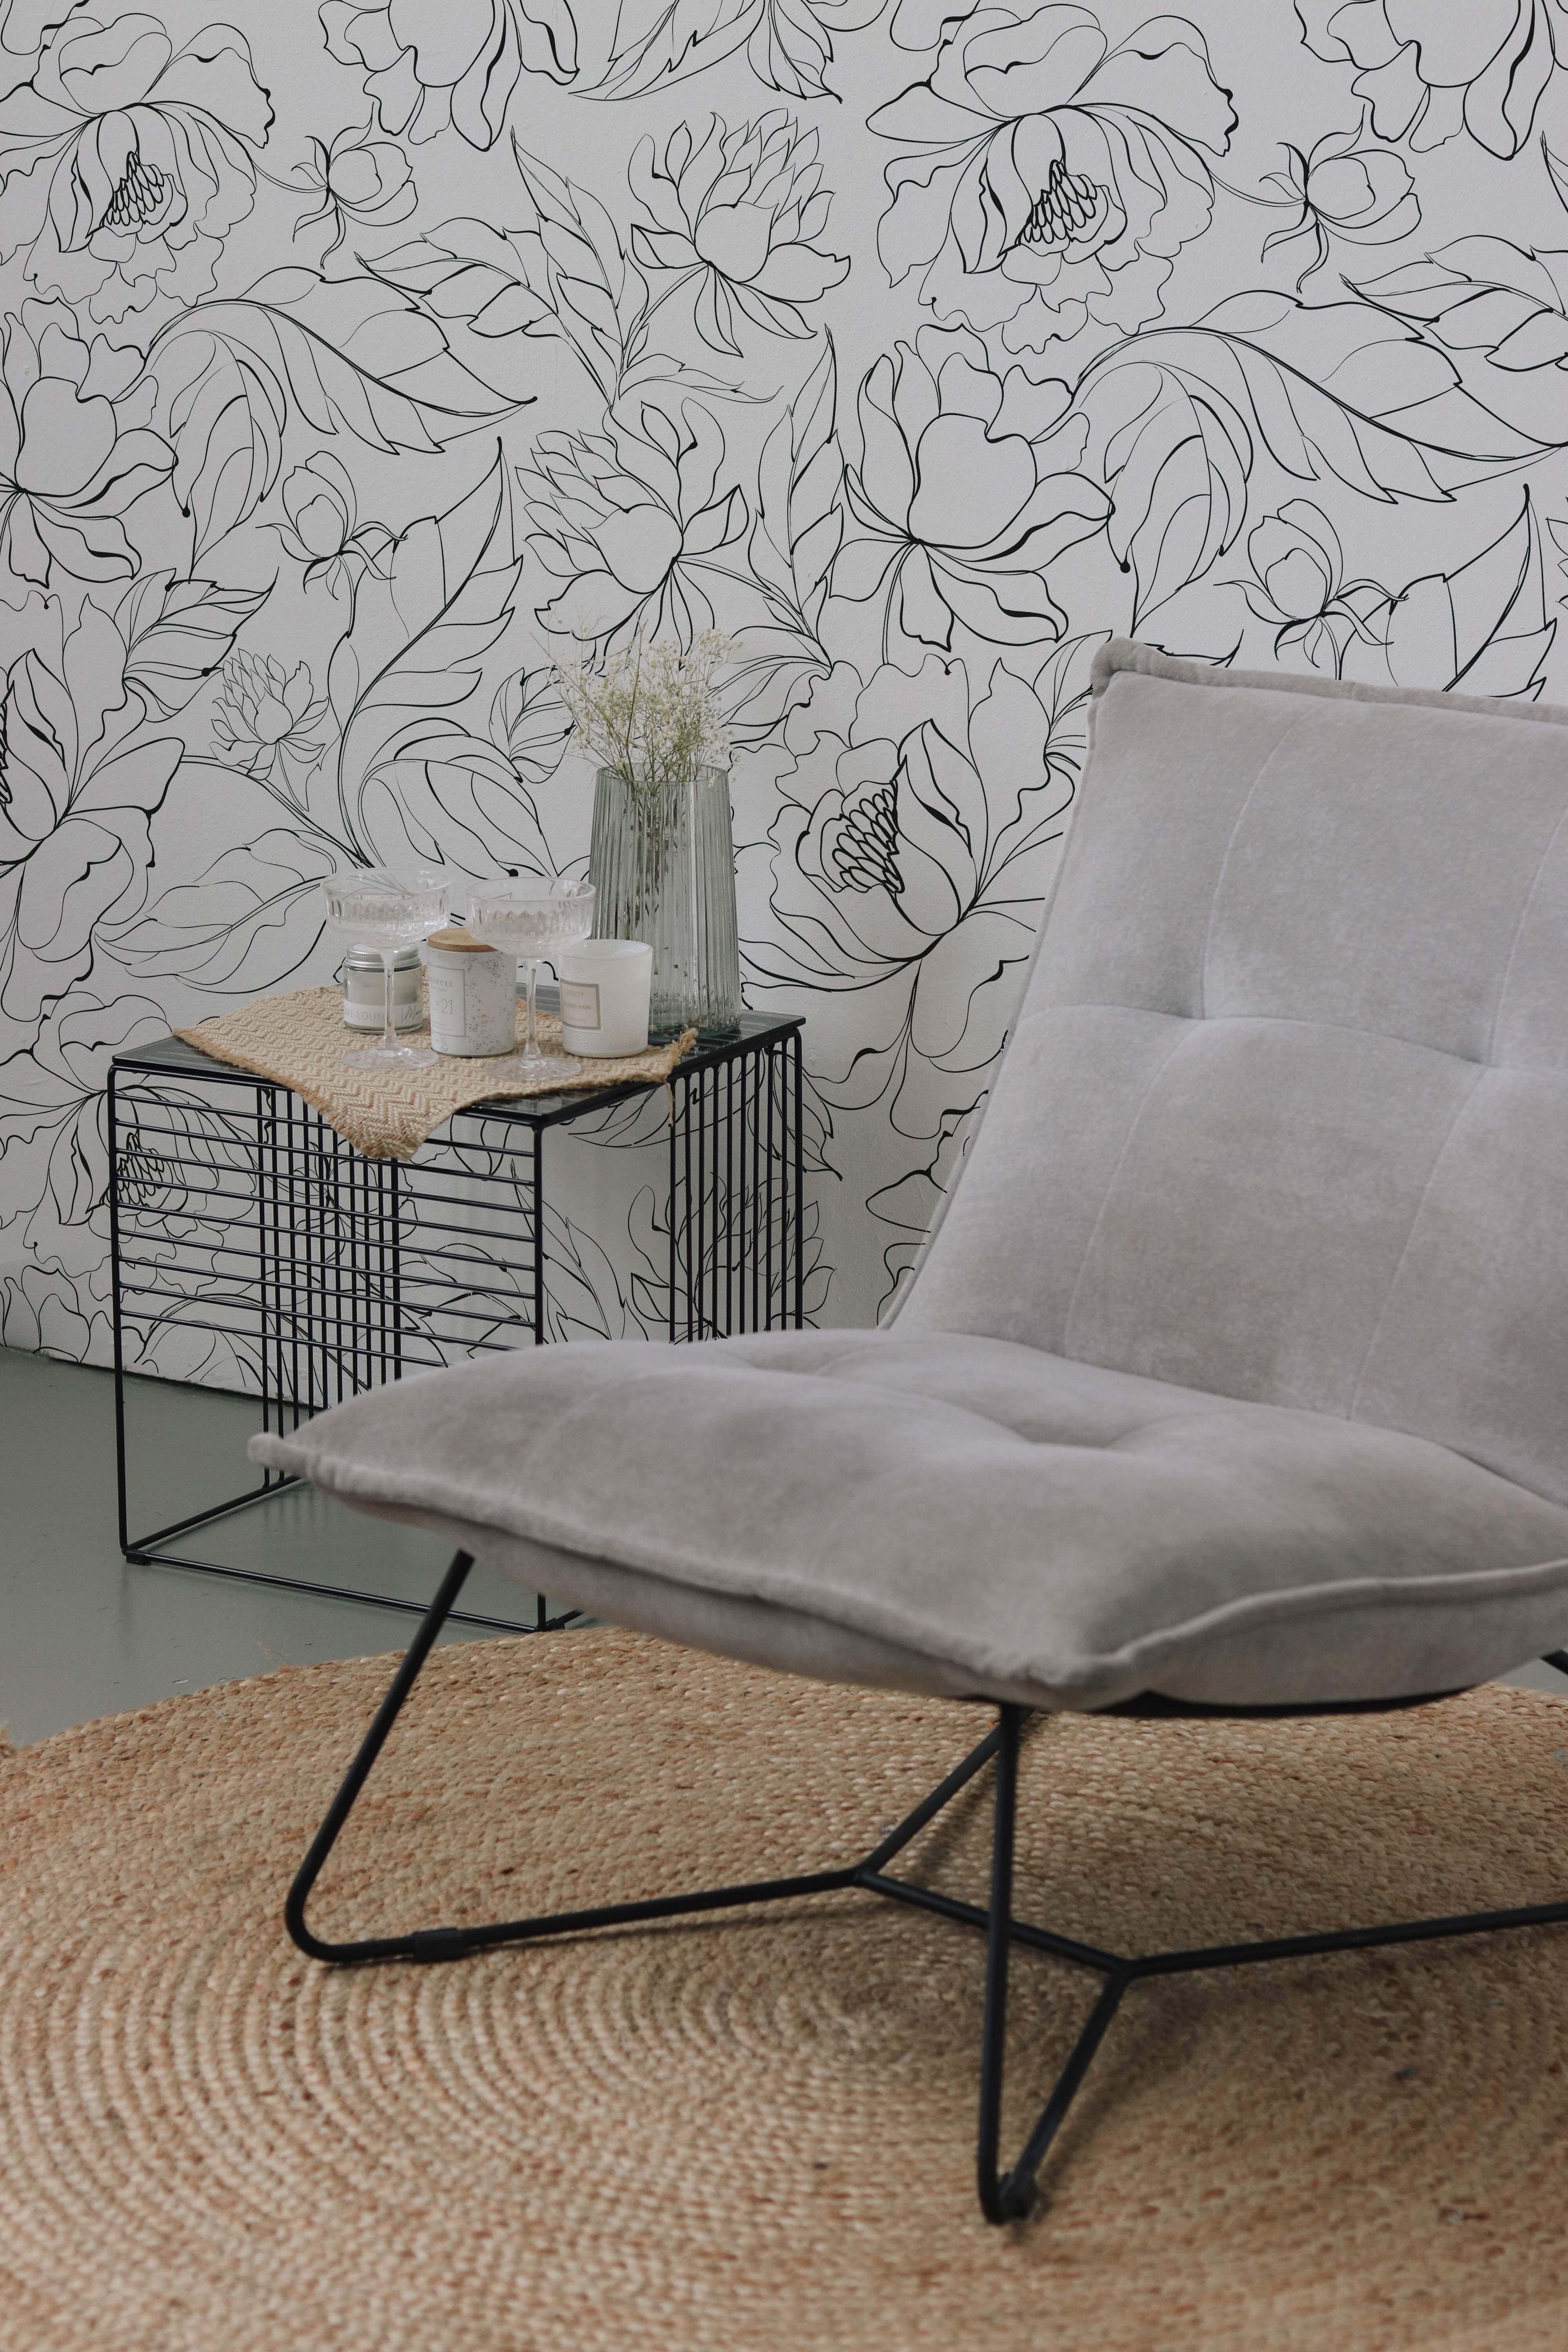 A close-up view of a stylish interior corner, with modern black floral wallpaper featuring a detailed floral line art, accompanied by a trendy wire table holding candles and a glass vase, set against a textured gray chair.